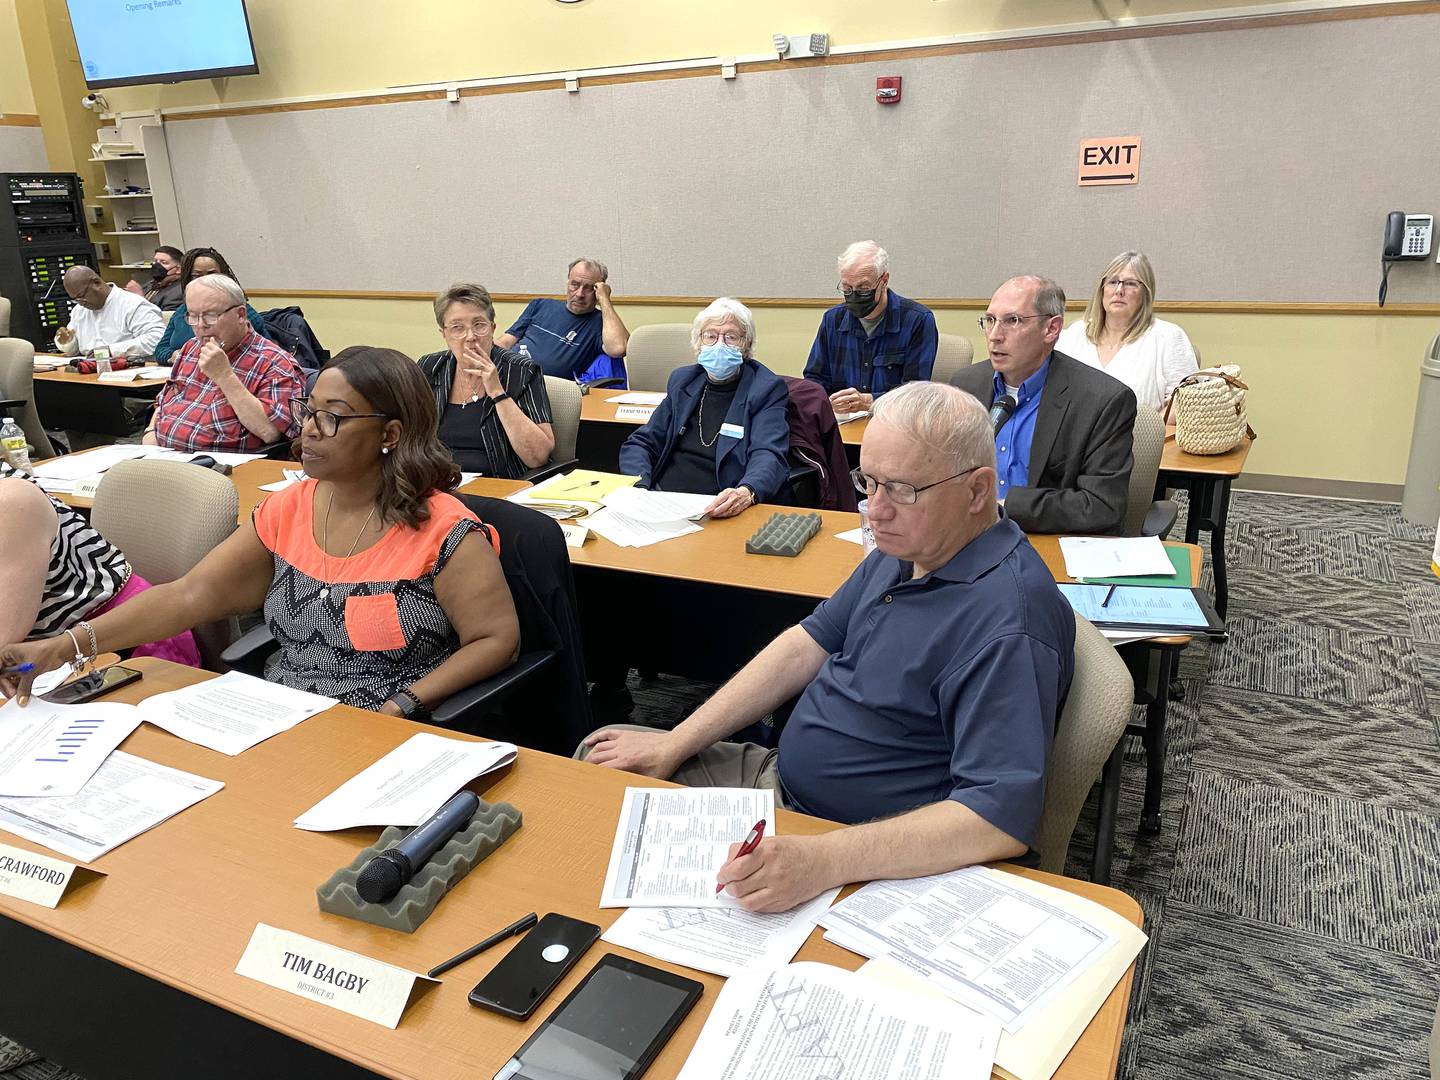 DeKalb County Board members listen as member Scott Campbell (right, middle row) gives a financial report about the DeKalb County Rehabilitation and Nursing Center, which could be sold to an Evanston-based buyer for $8.1 million, during a Committee of the Whole meeting Wednesday, June 8, 2022.